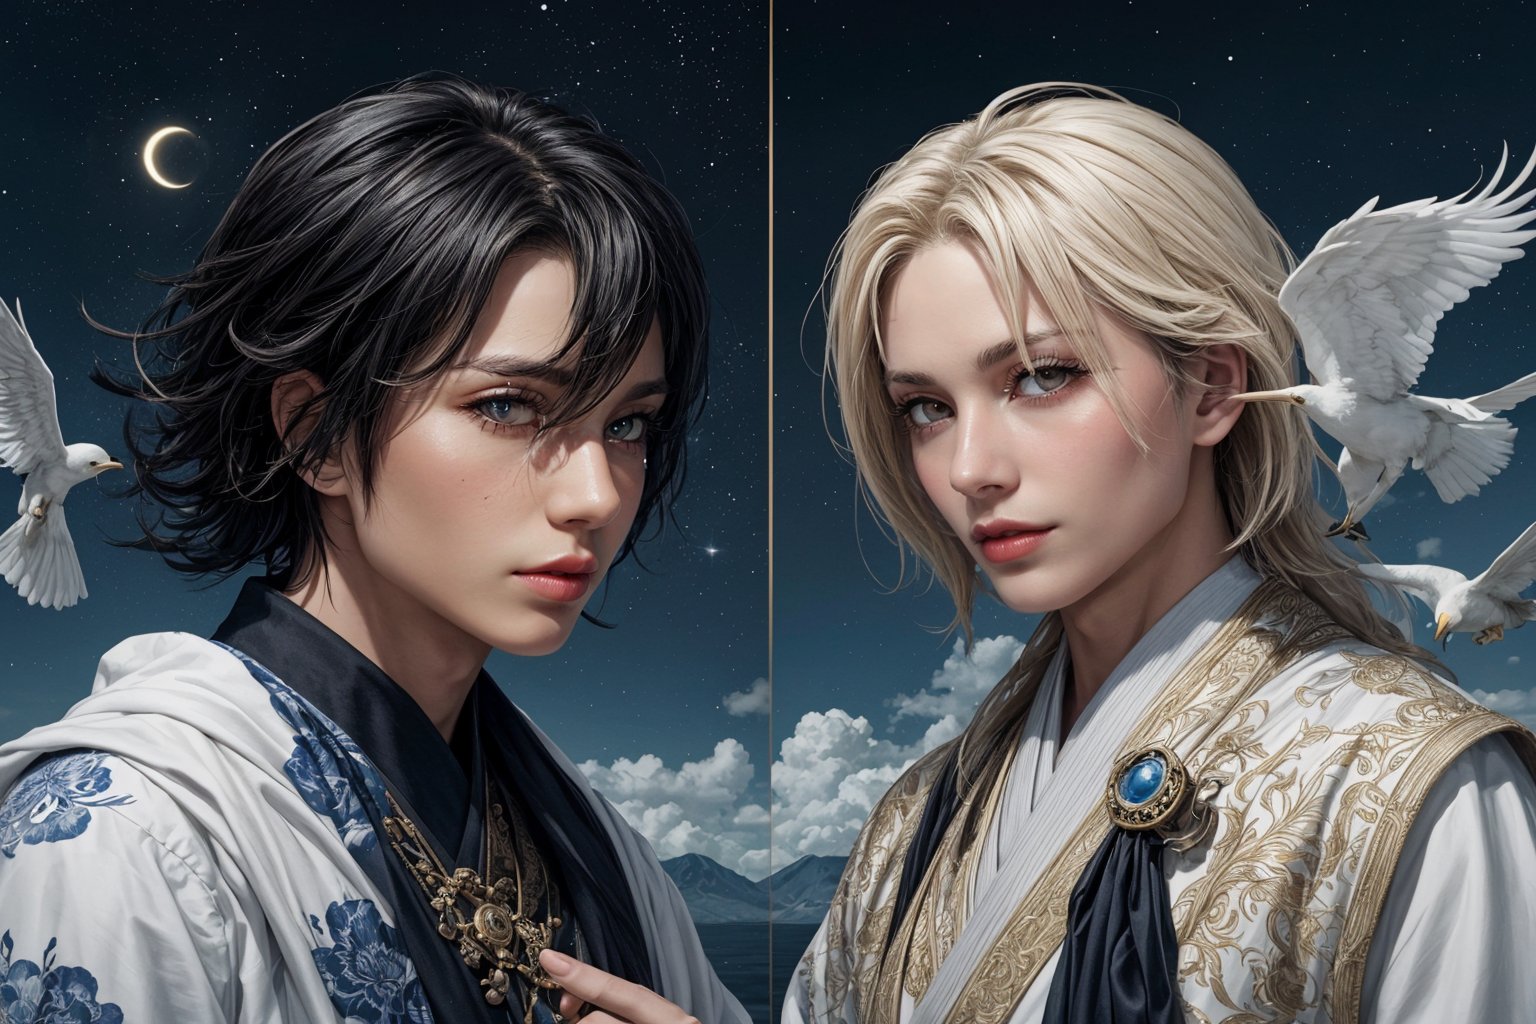 Majestic dual portrait of Japanese male idols, attired in ornate black and white ancient garb, amidst a serene Tai Chi-inspired backdrop harmonizing blue and white hues with celestial elements: stars, clouds, and birds. Golden paint splashes add an air of mythology as the subjects are depicted from multiple angles, exuding an aura of elegance and otherworldliness.,AIDA_LoRA_AnC